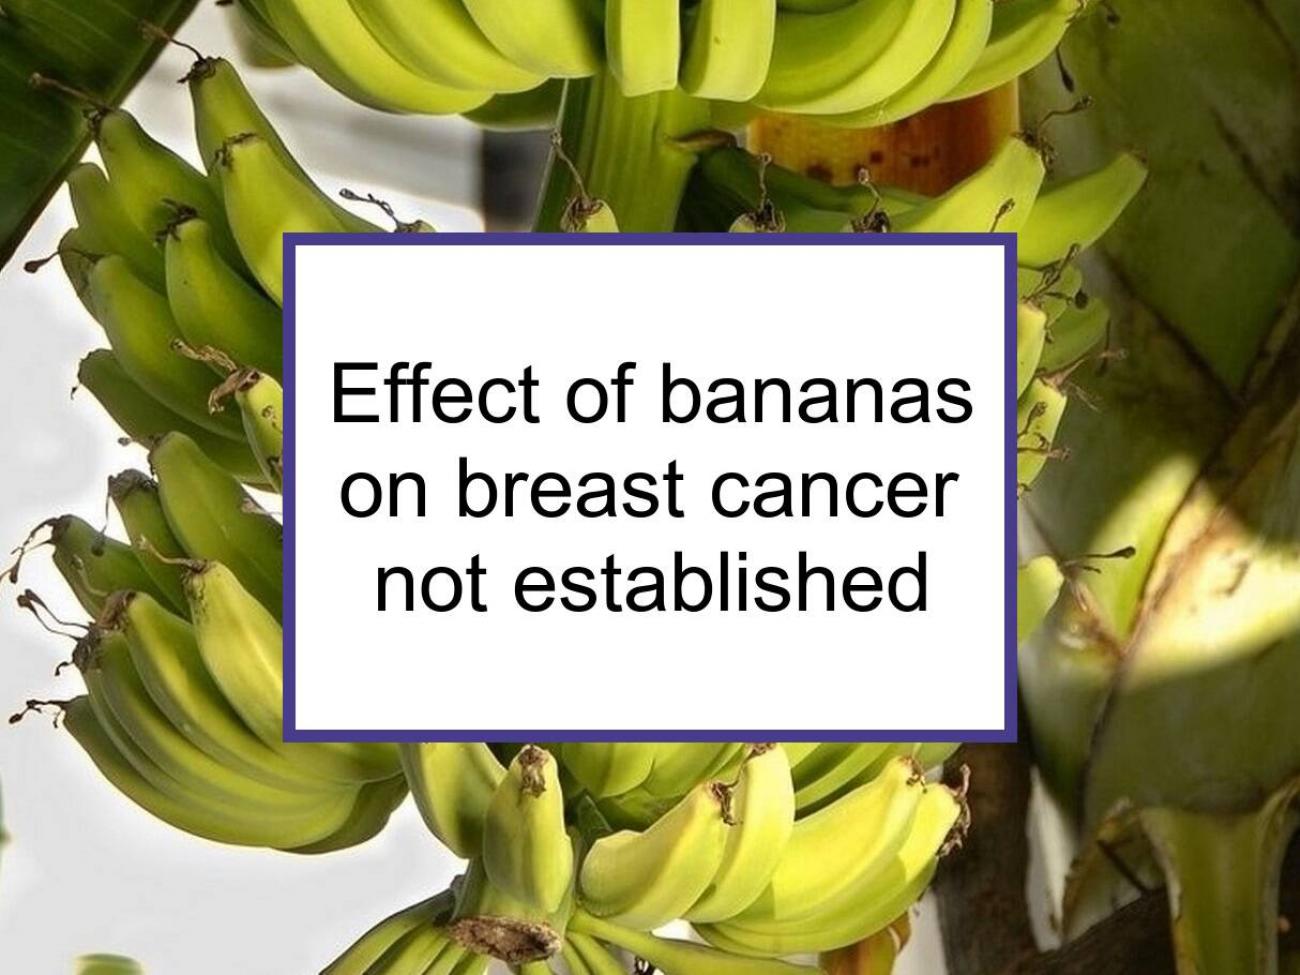 Studies Have Not Established The Effect Of Bananas On Breast